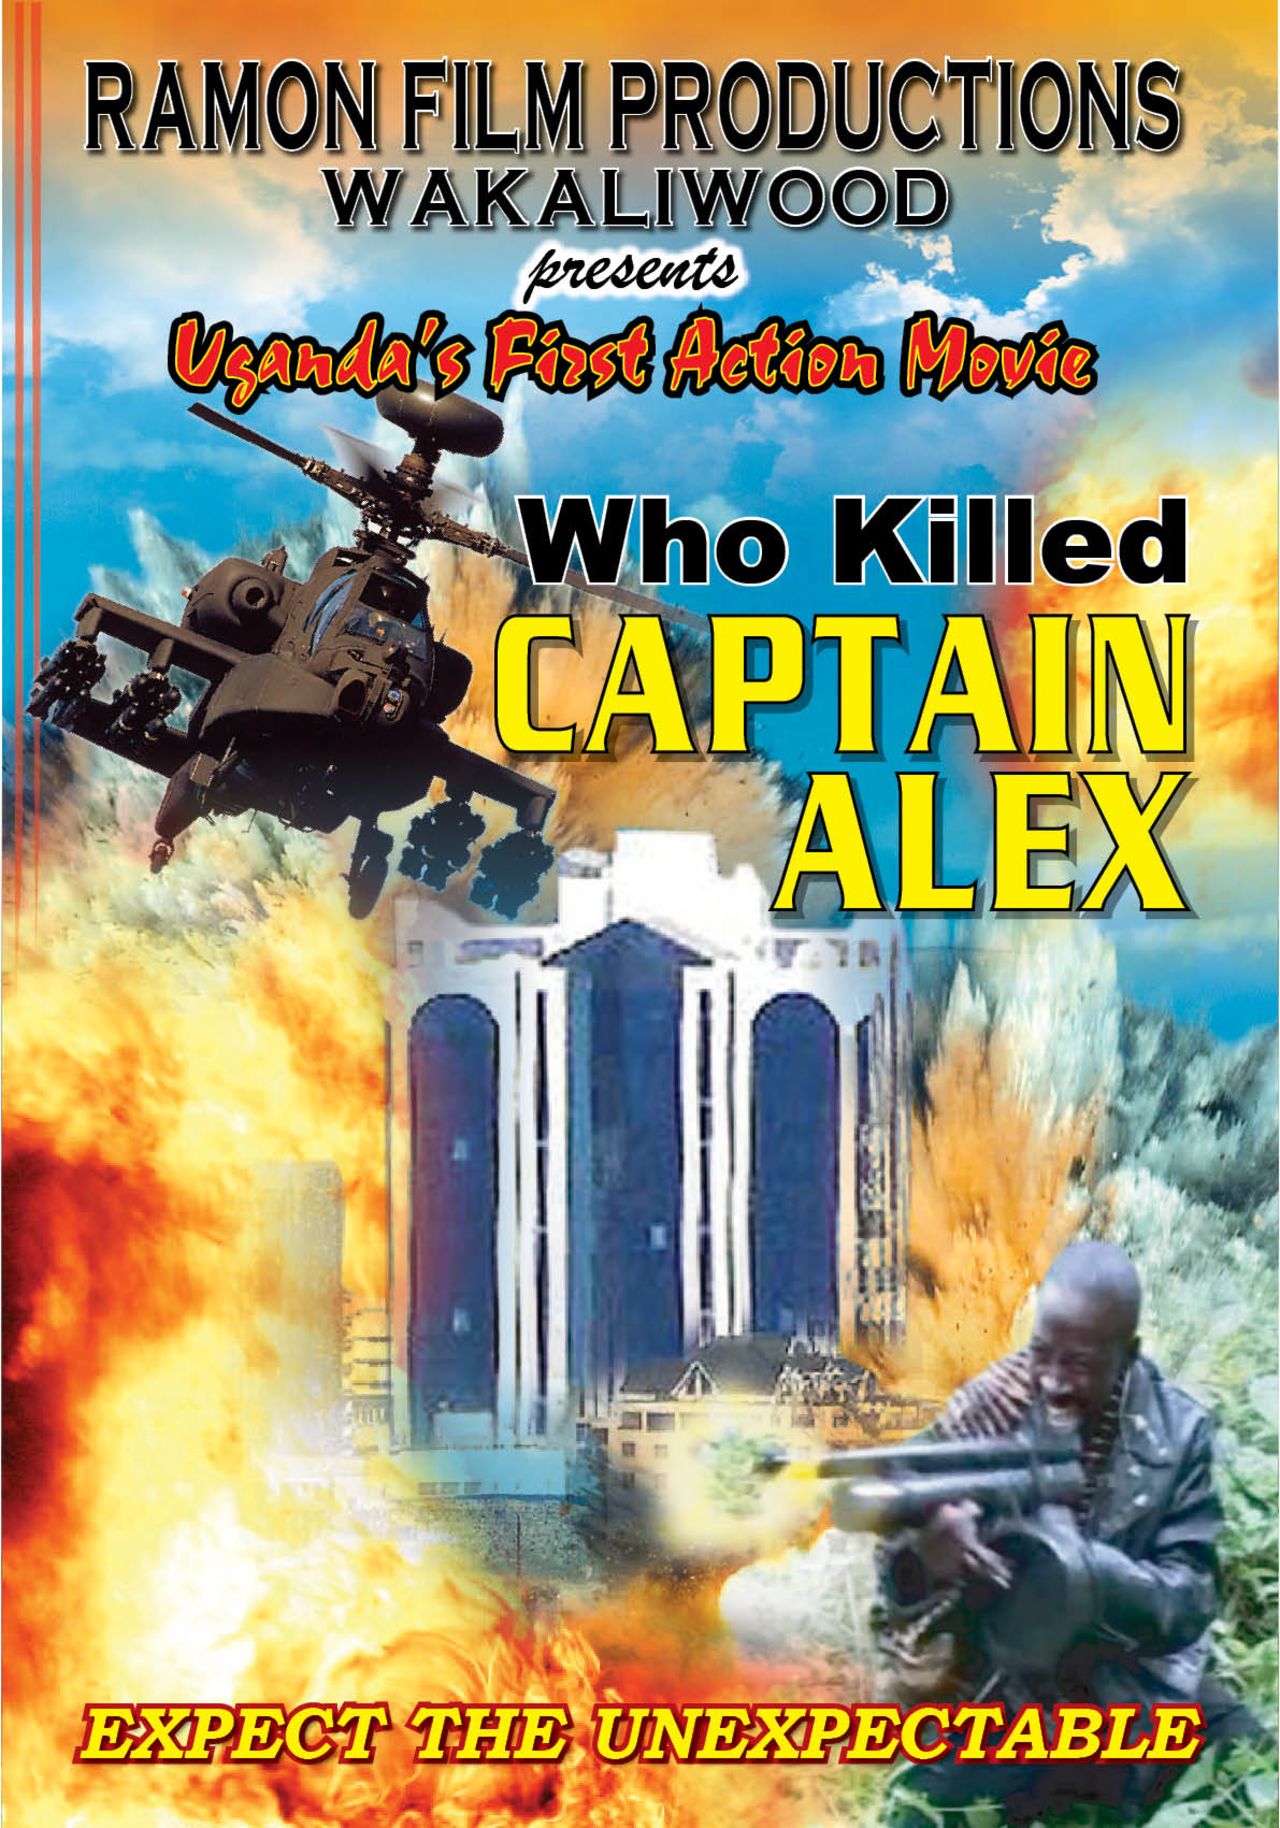 Poster for the 2010 film Who Killed Captain Alex? The movie's trailer has had more the 2 million views on YouTube.